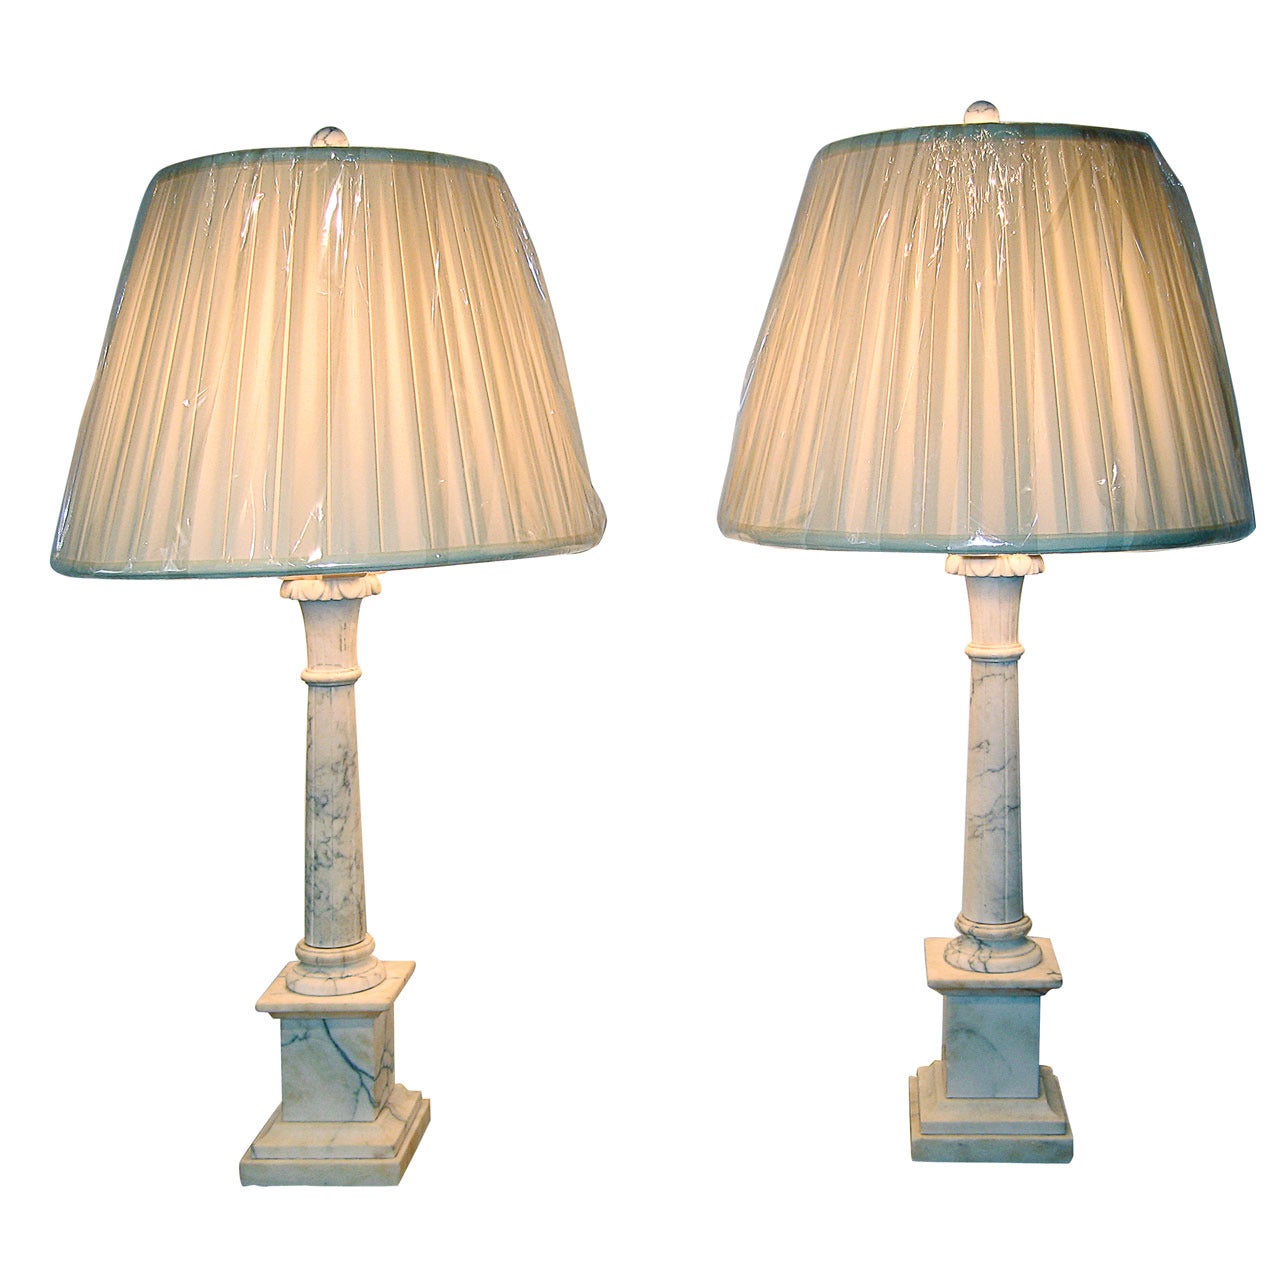 Pair of Marble Lamps with Shades, Italy circa 1950